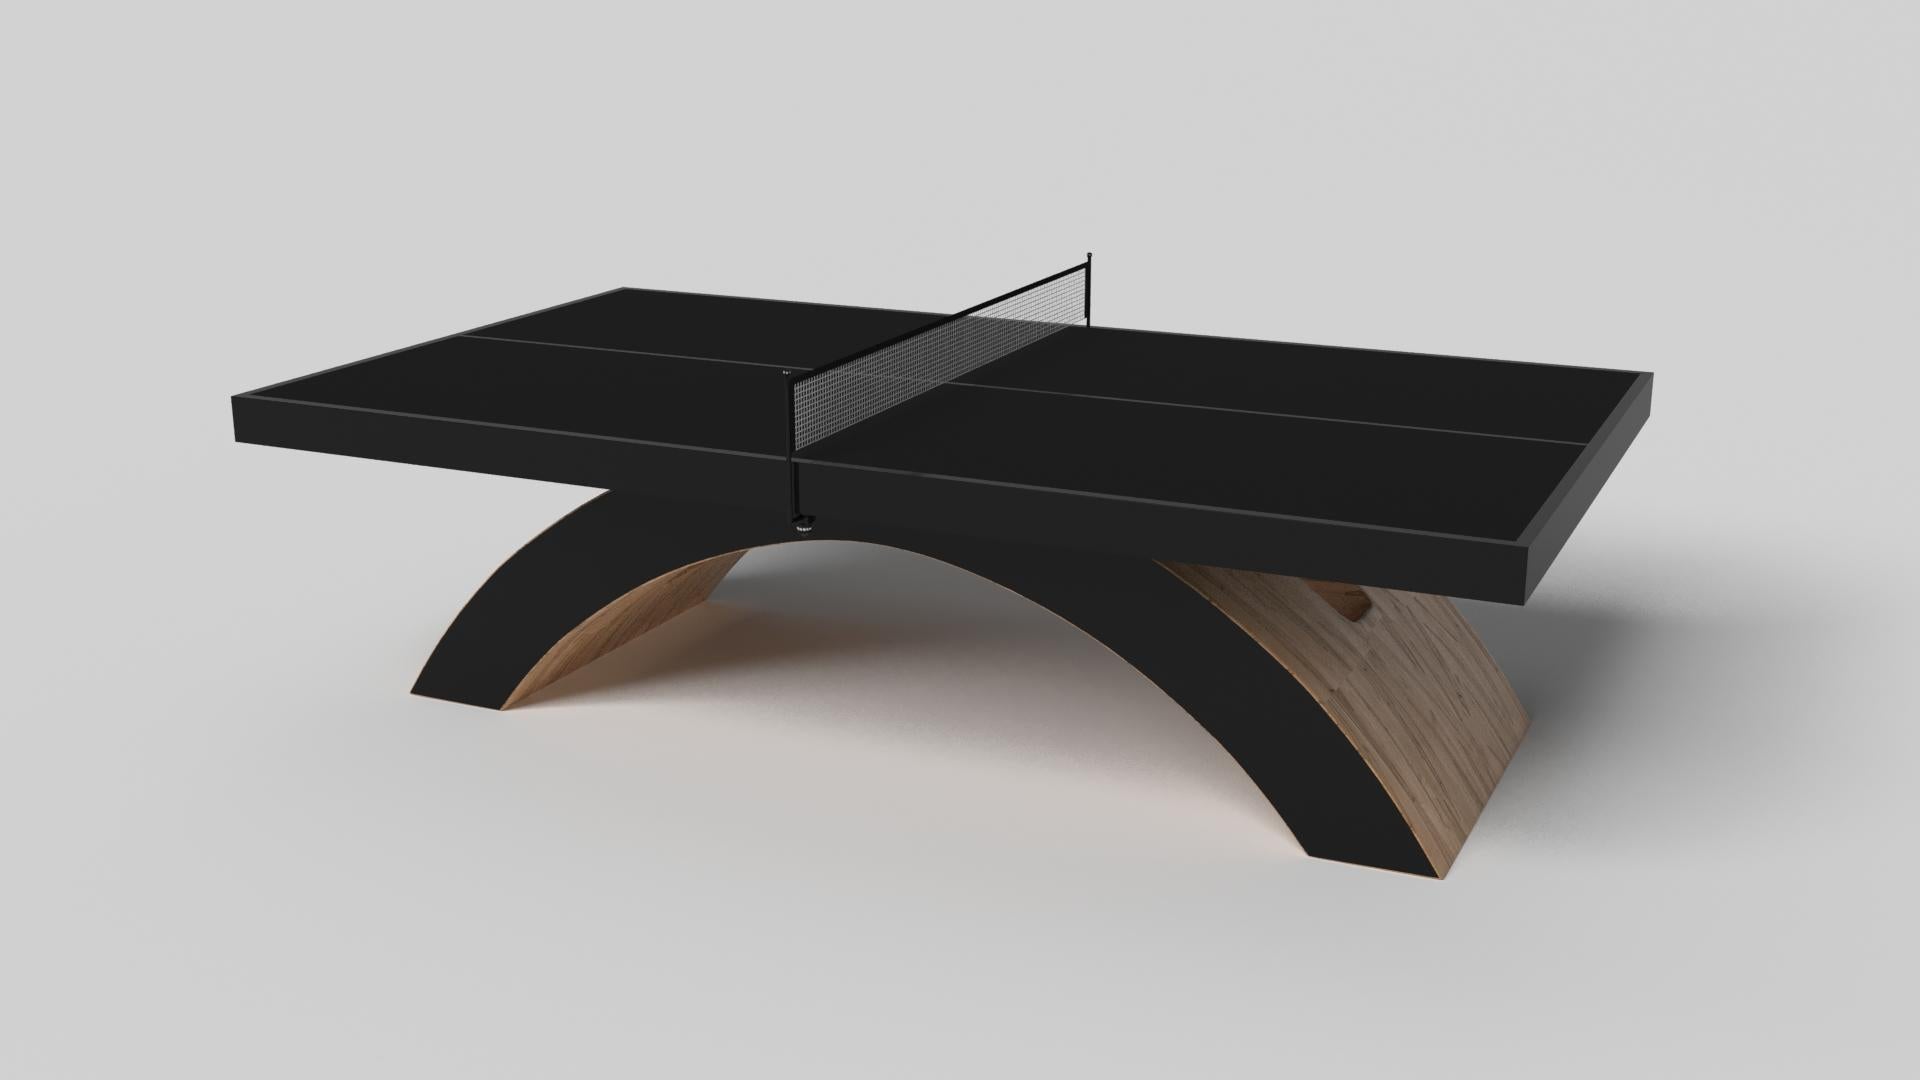 An open, arched base balances beautifully against the hard edges of the rectangular surface top, making the Zenith table tennis table in black with red a striking juxtaposition of modern, geometric forms. Minimalist in its appeal yet luxurious in